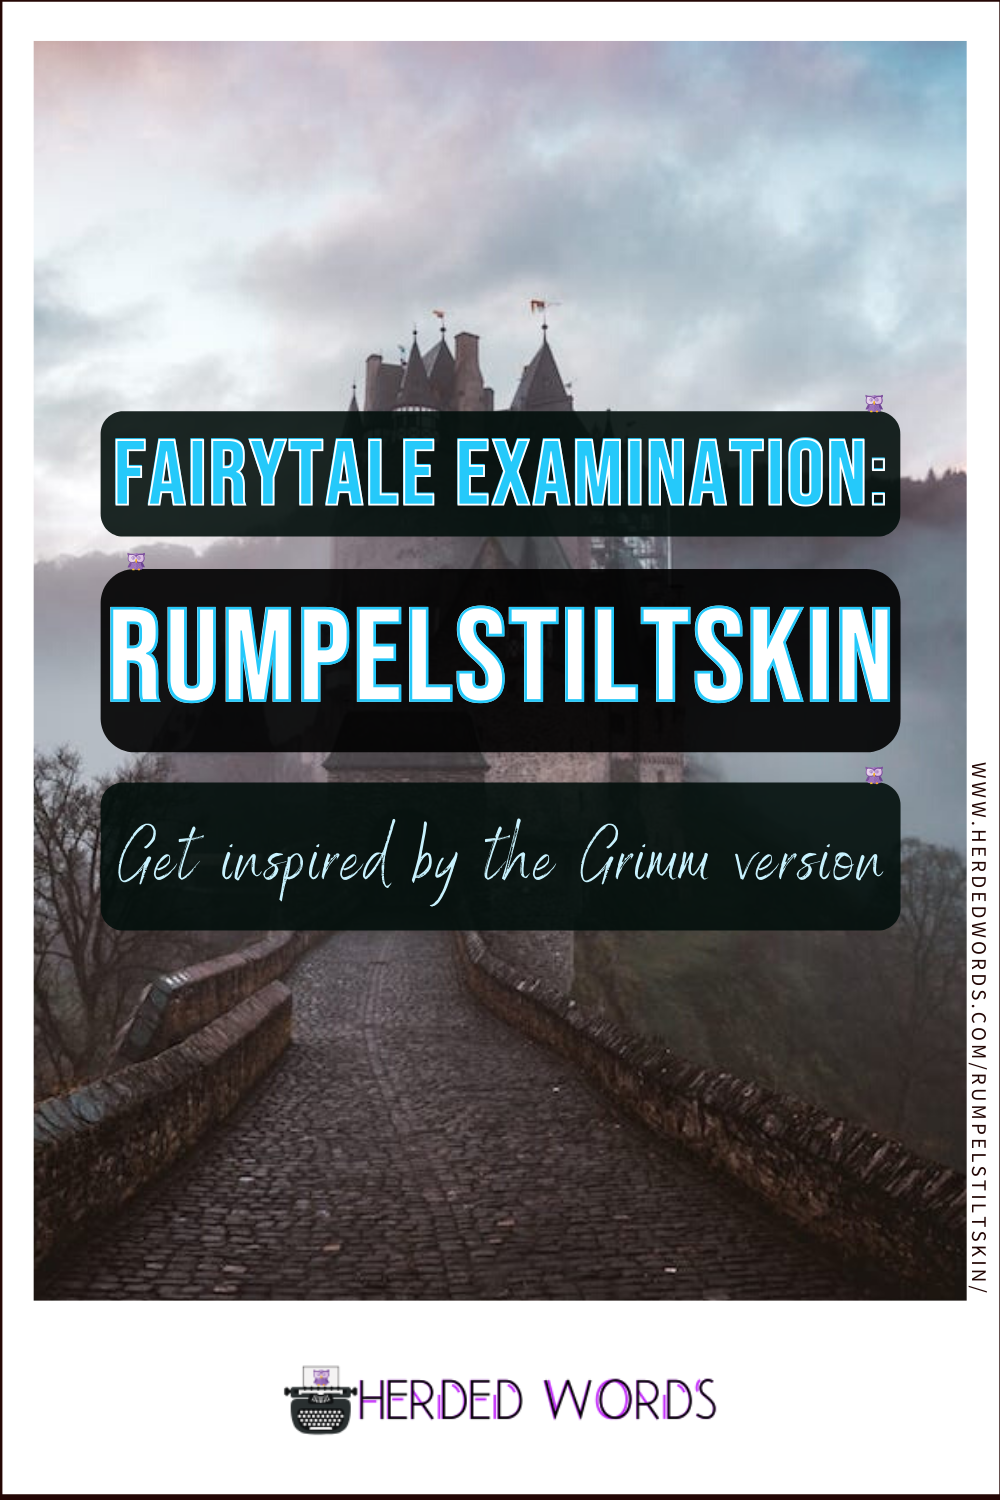 Image Link to Fairytale Examination of RUMPELSTILTSKIN (get inspired by the Grimm version)